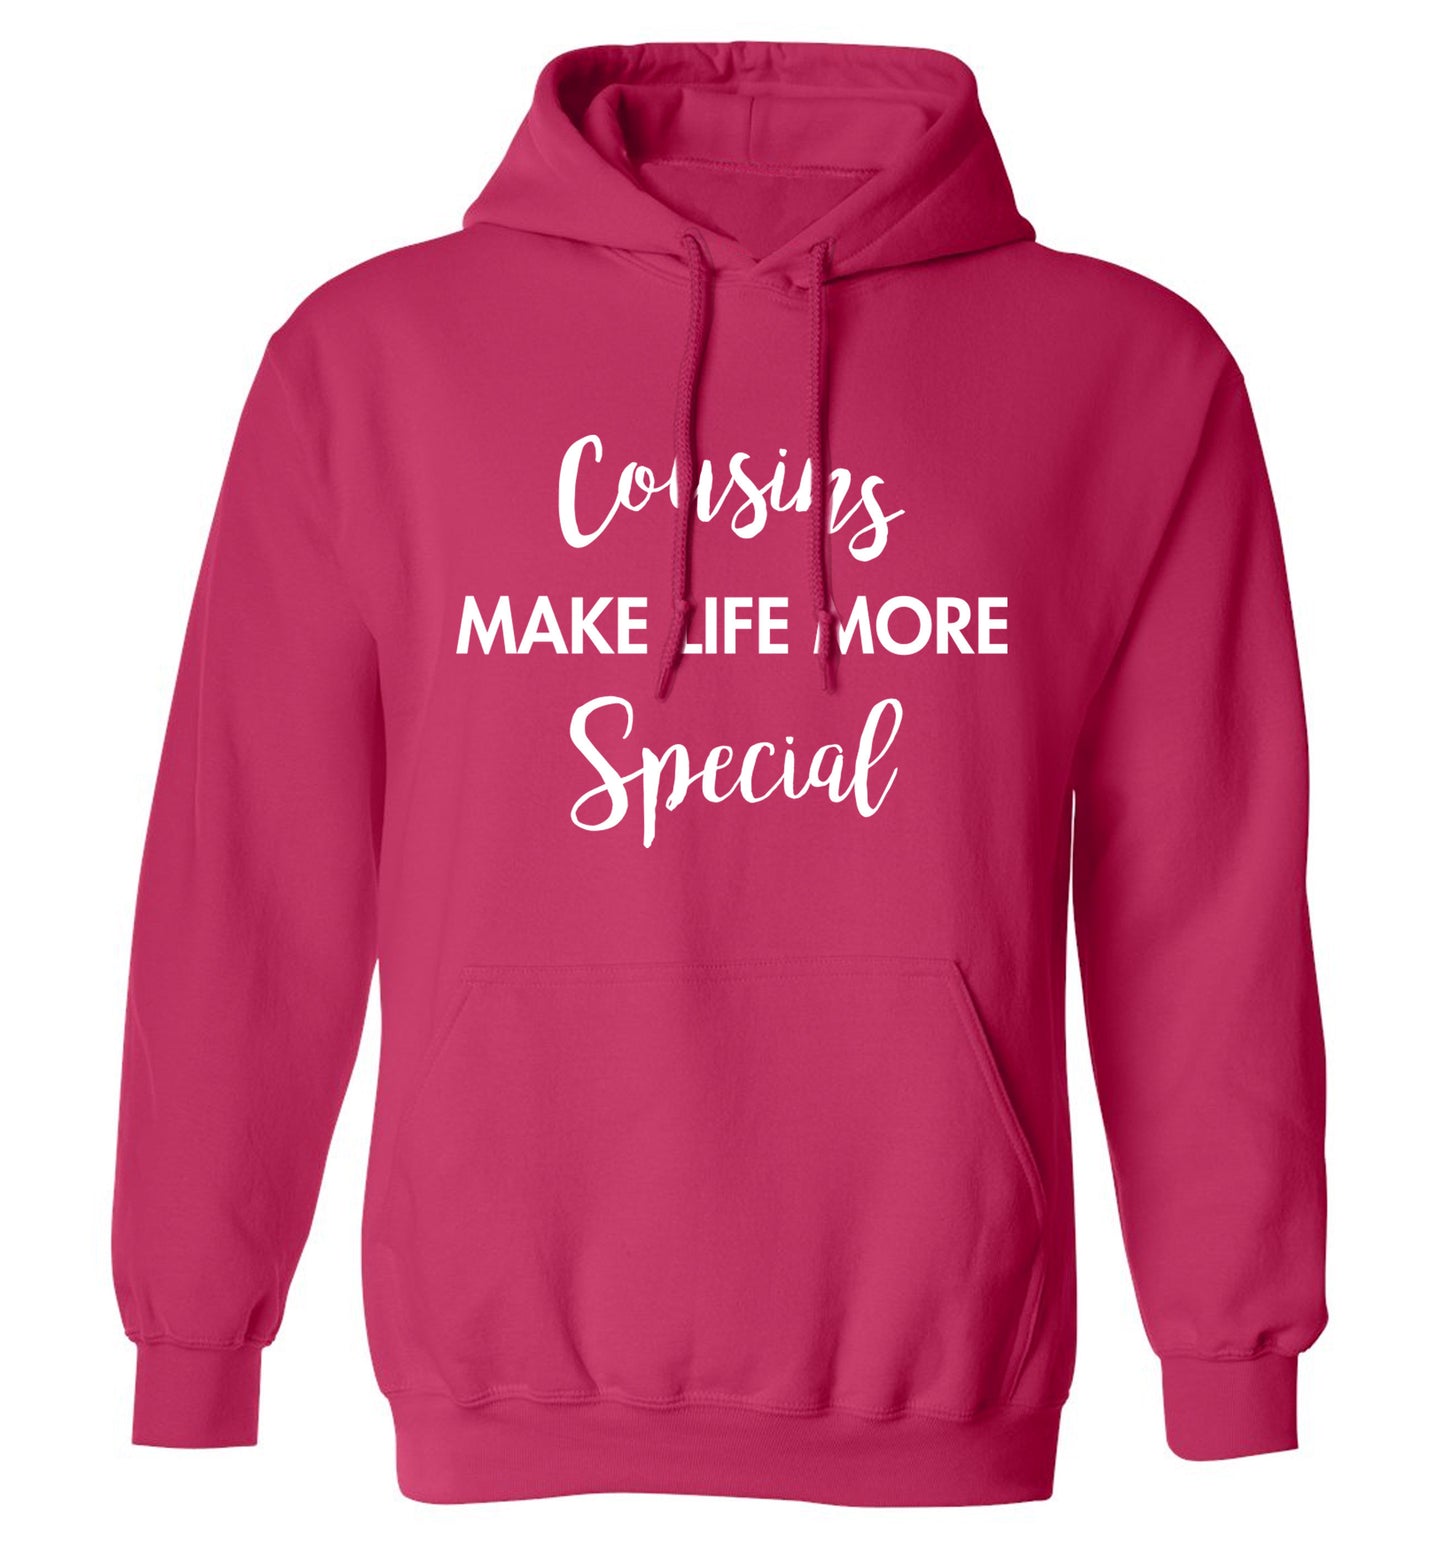 Cousins make life more special adults unisex pink hoodie 2XL